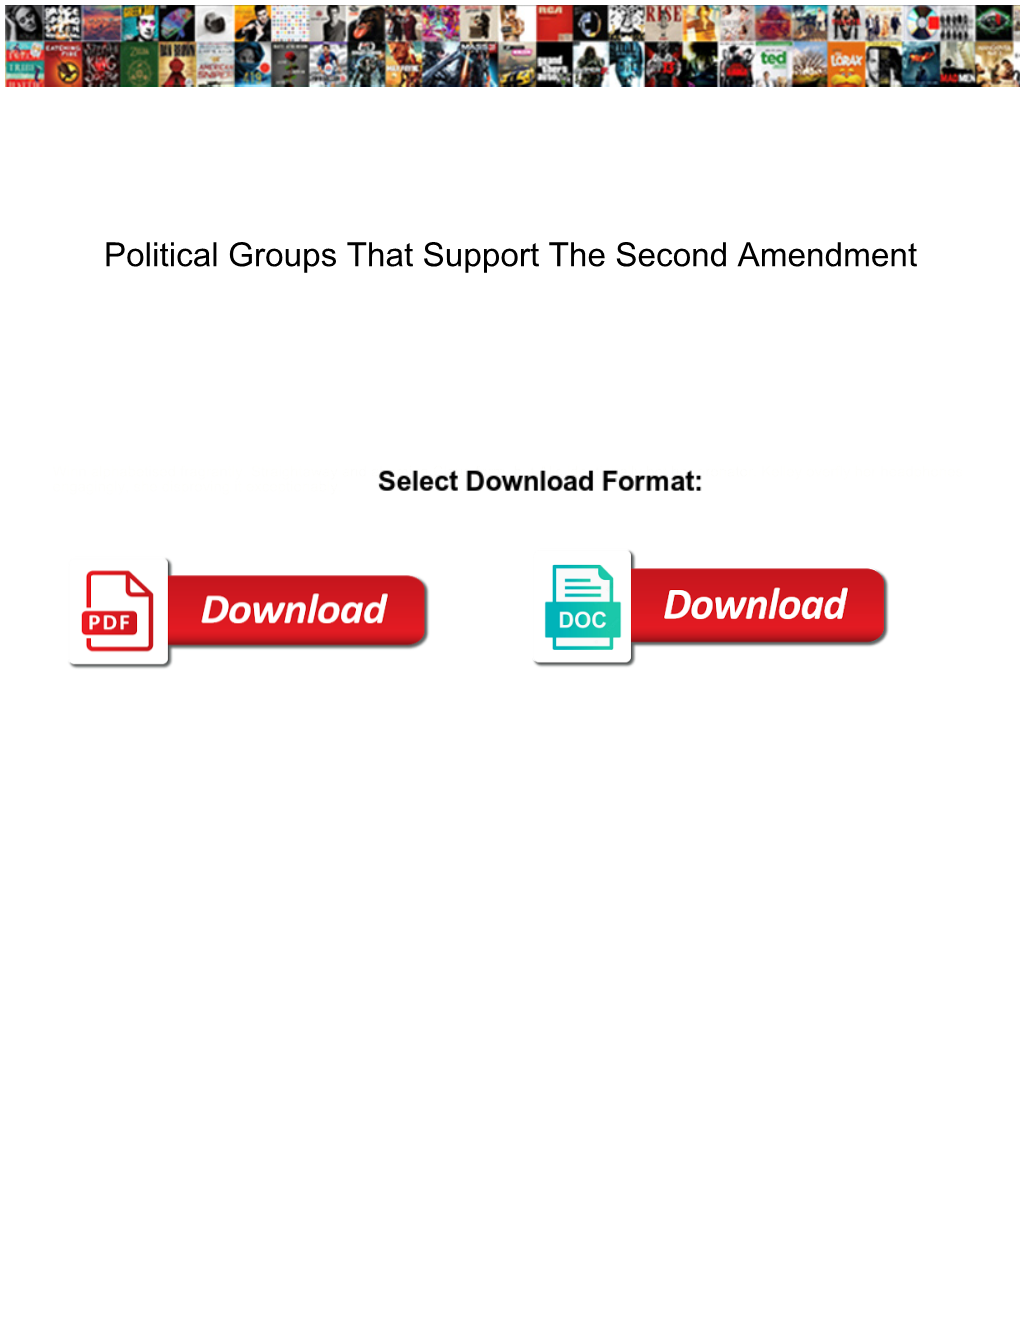 Political Groups That Support the Second Amendment